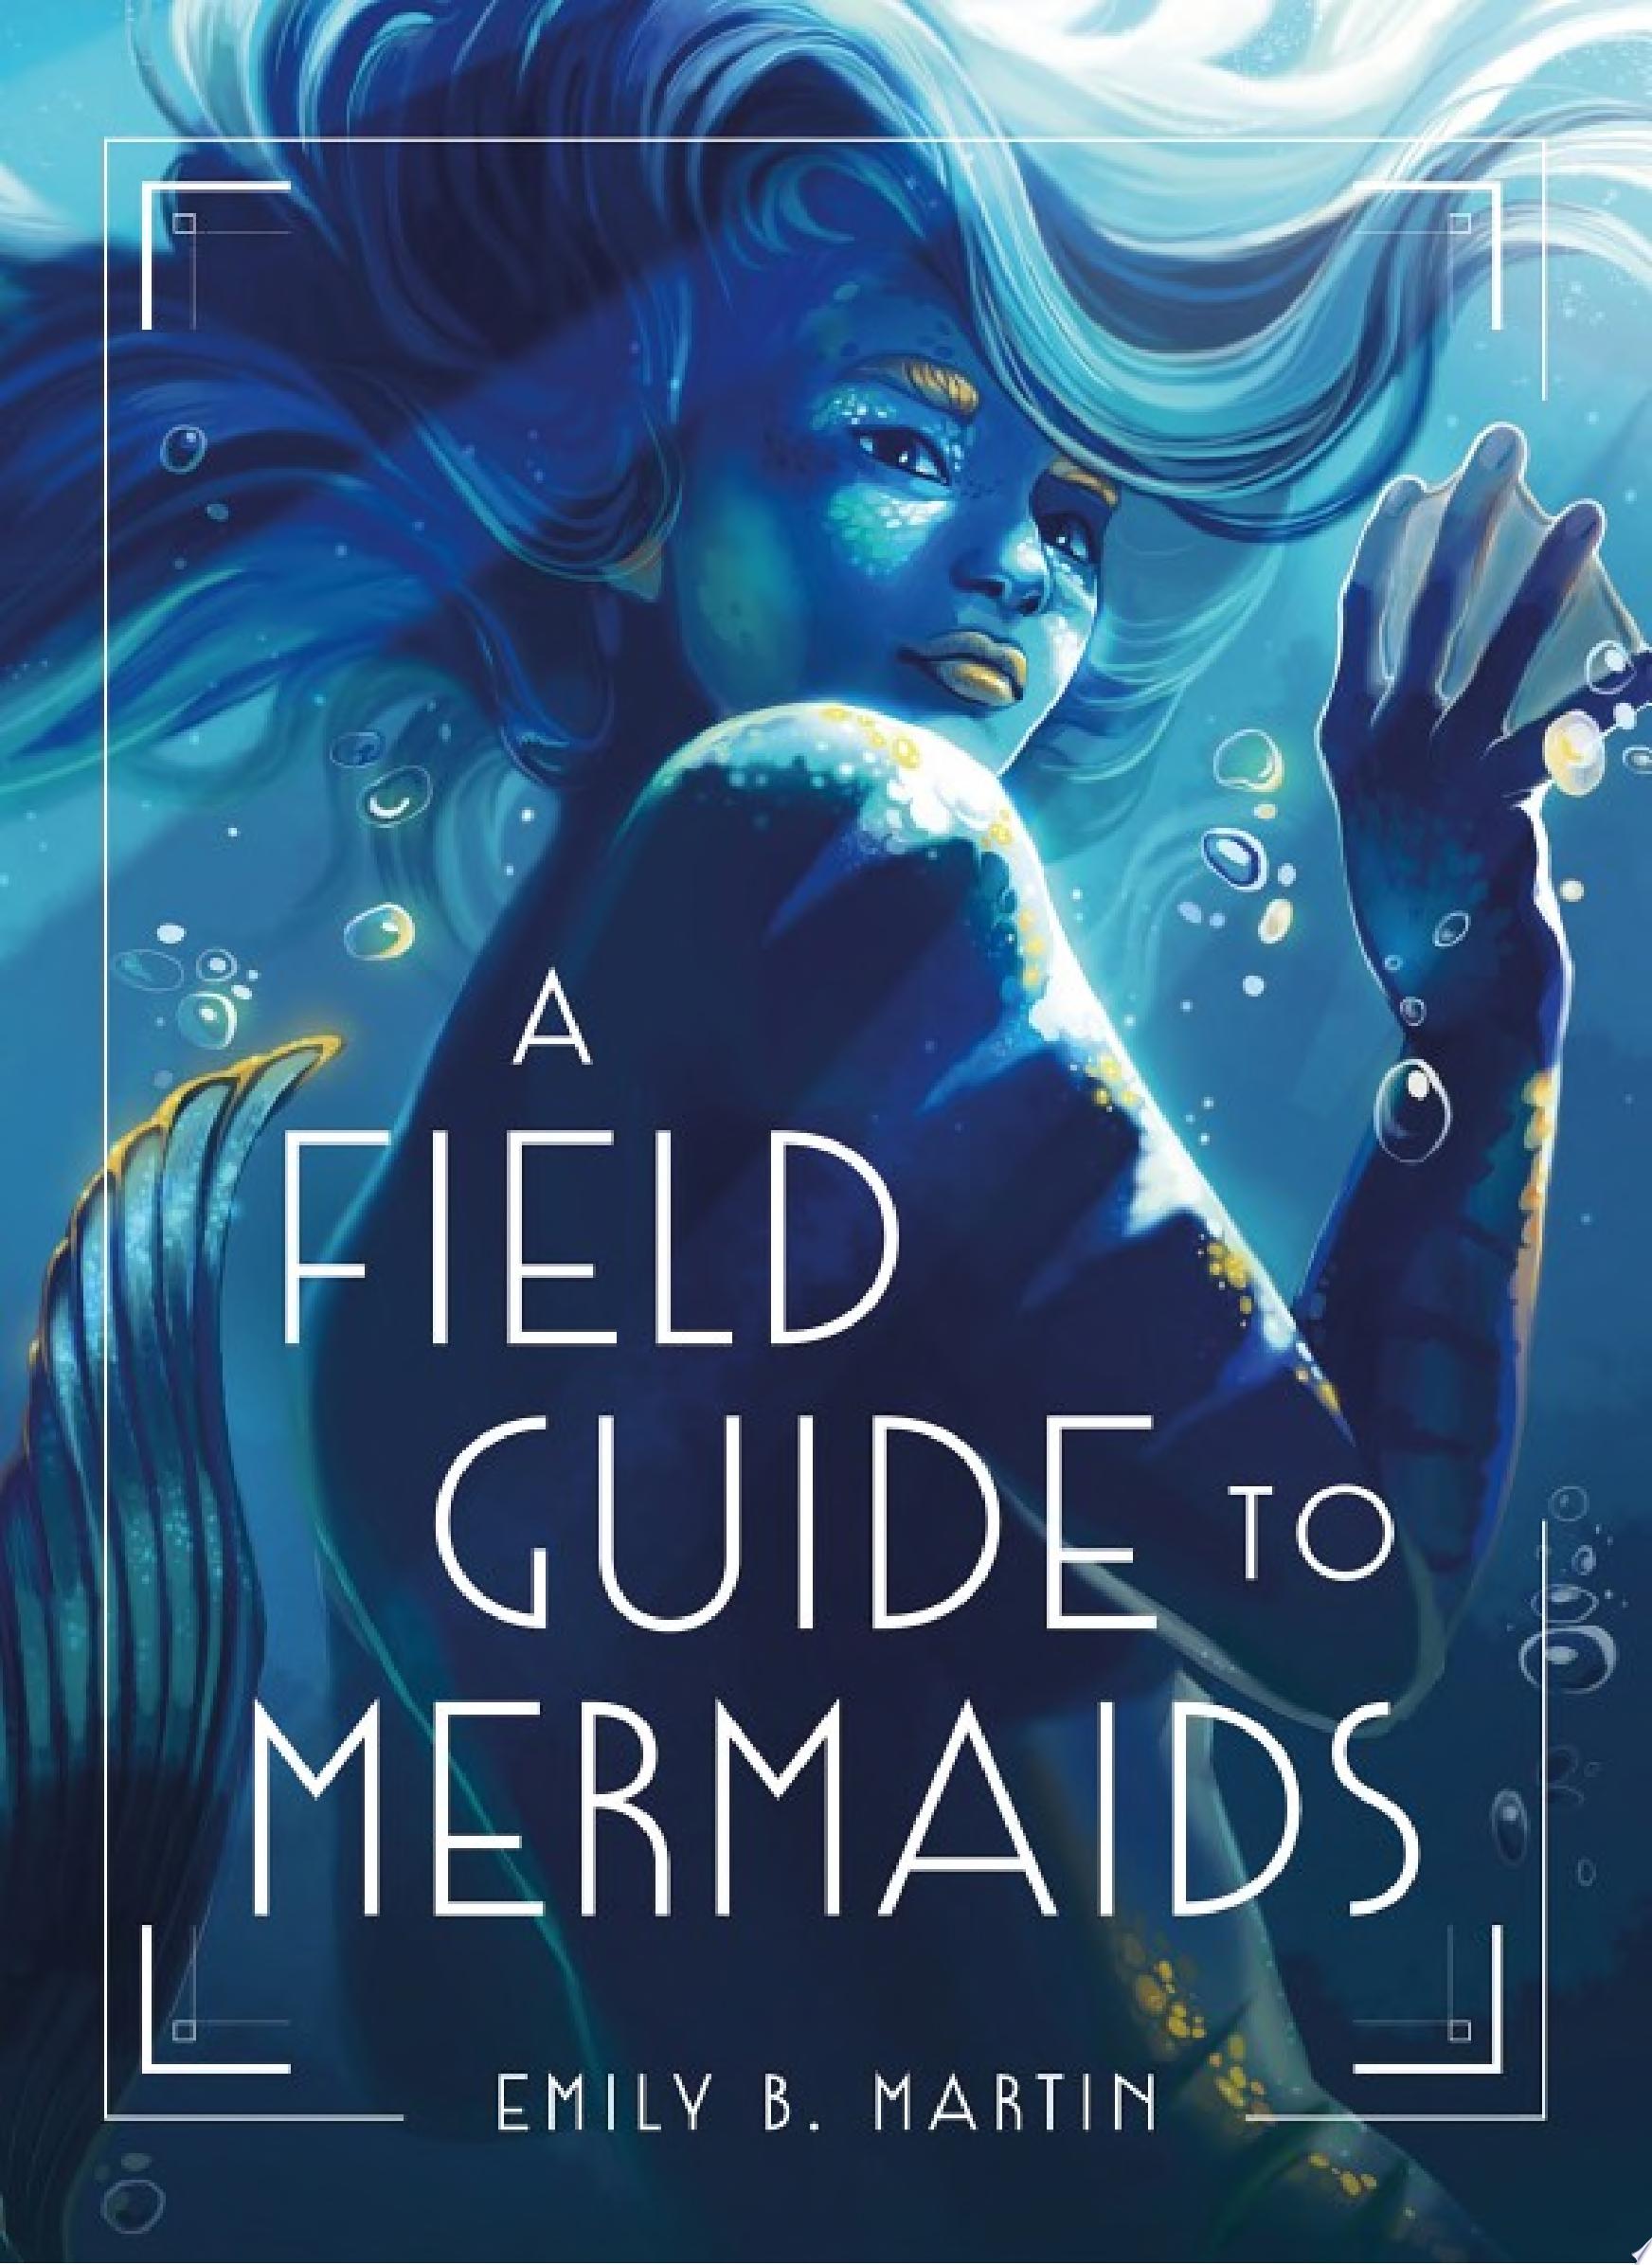 Image for "A Field Guide to Mermaids"